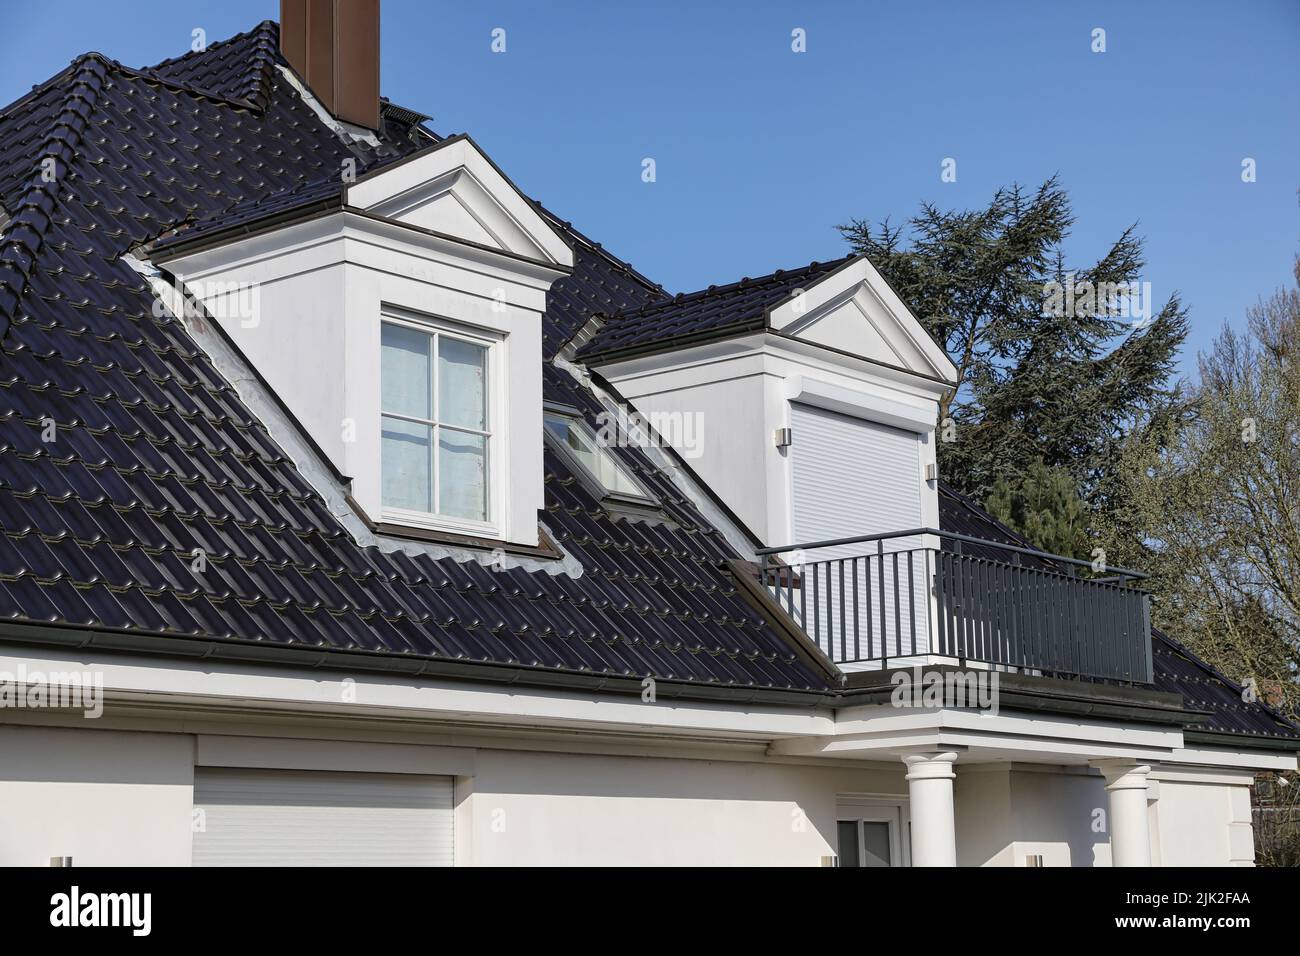 detached house with gabled dormers on black roof Stock Photo